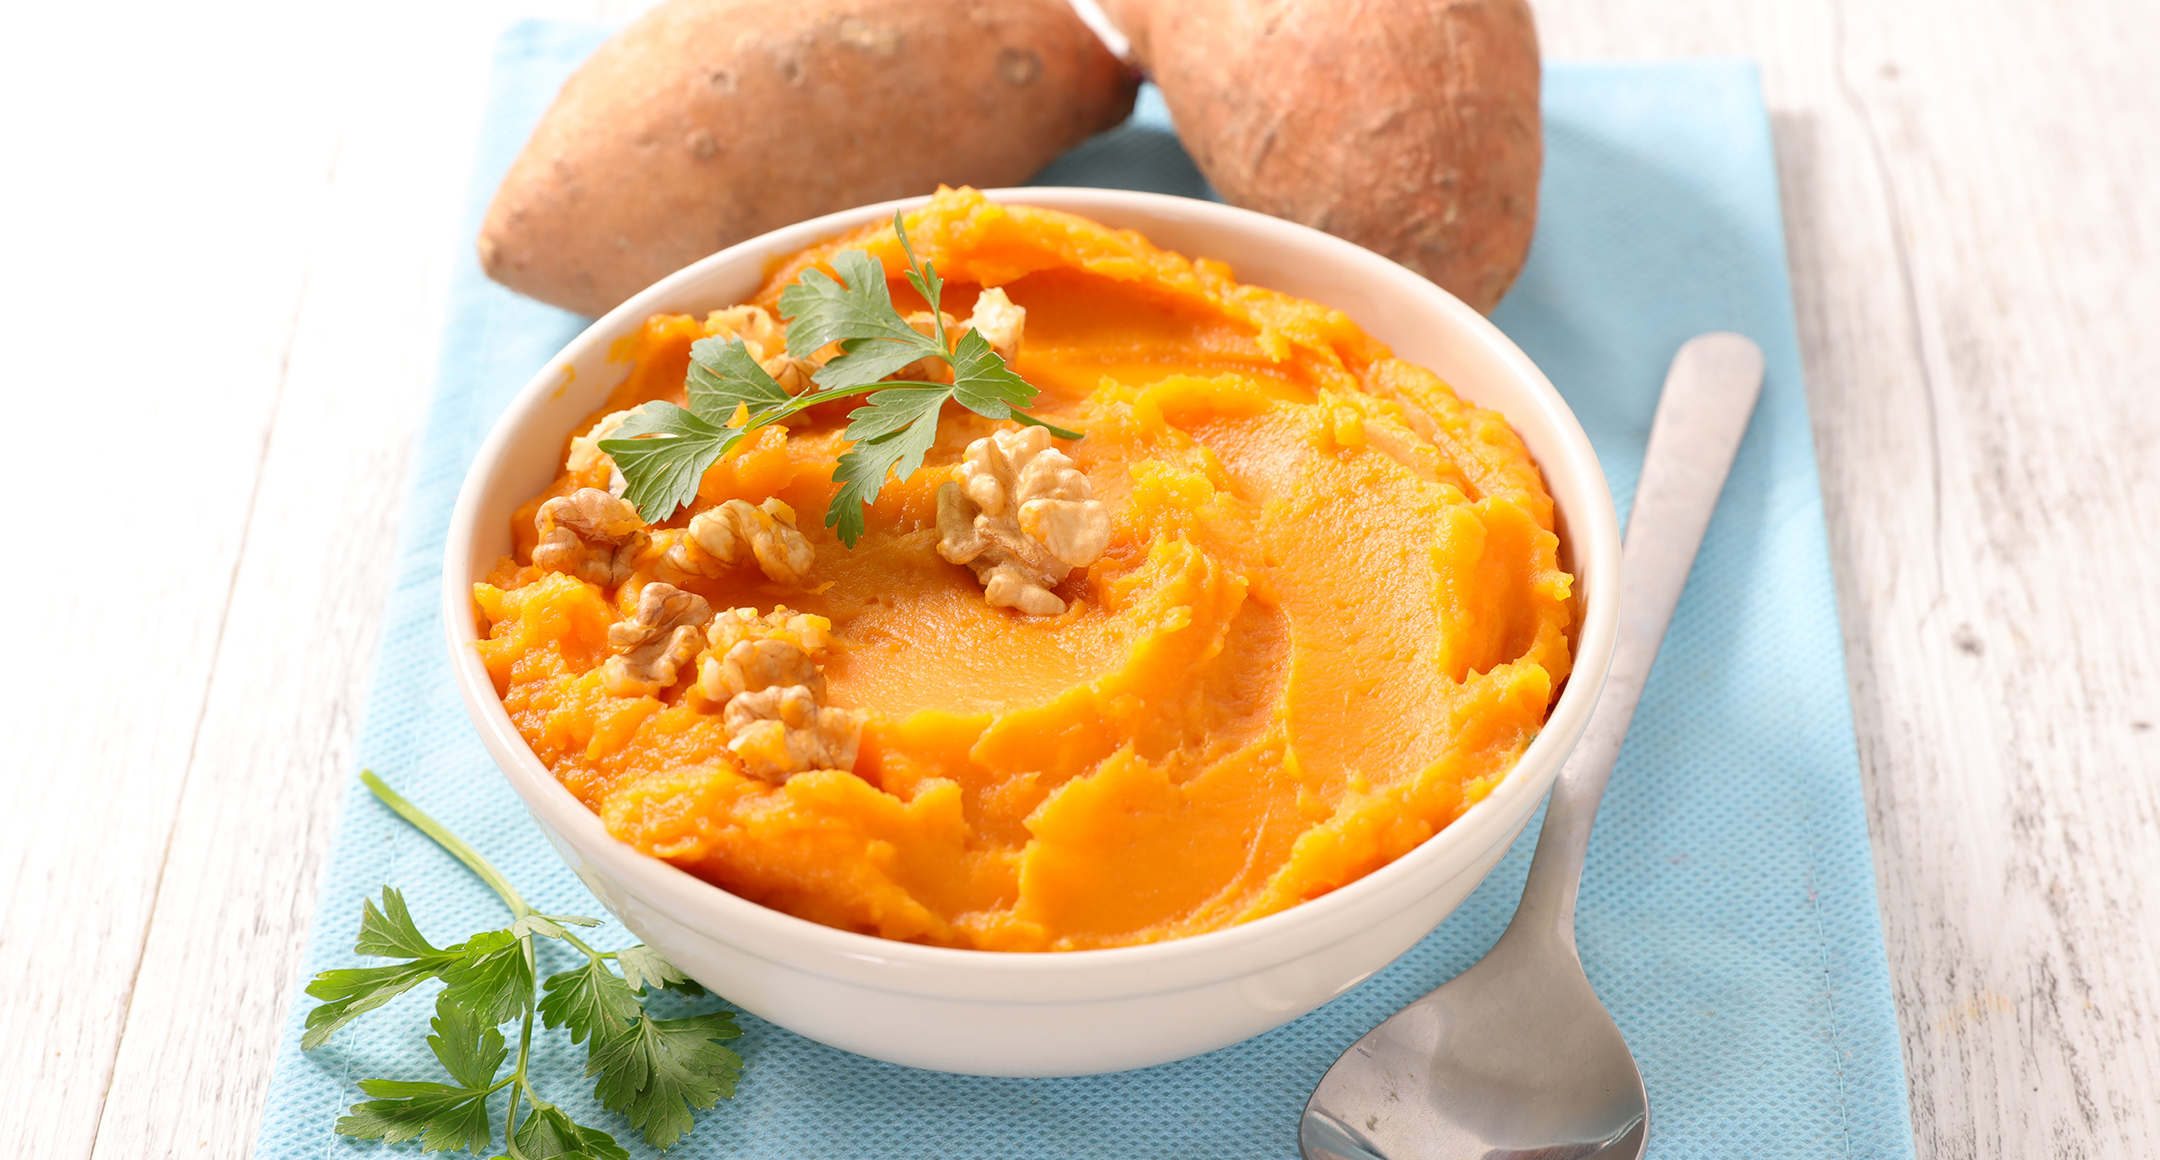 Mashed Sweet Potatoes With Pineapple